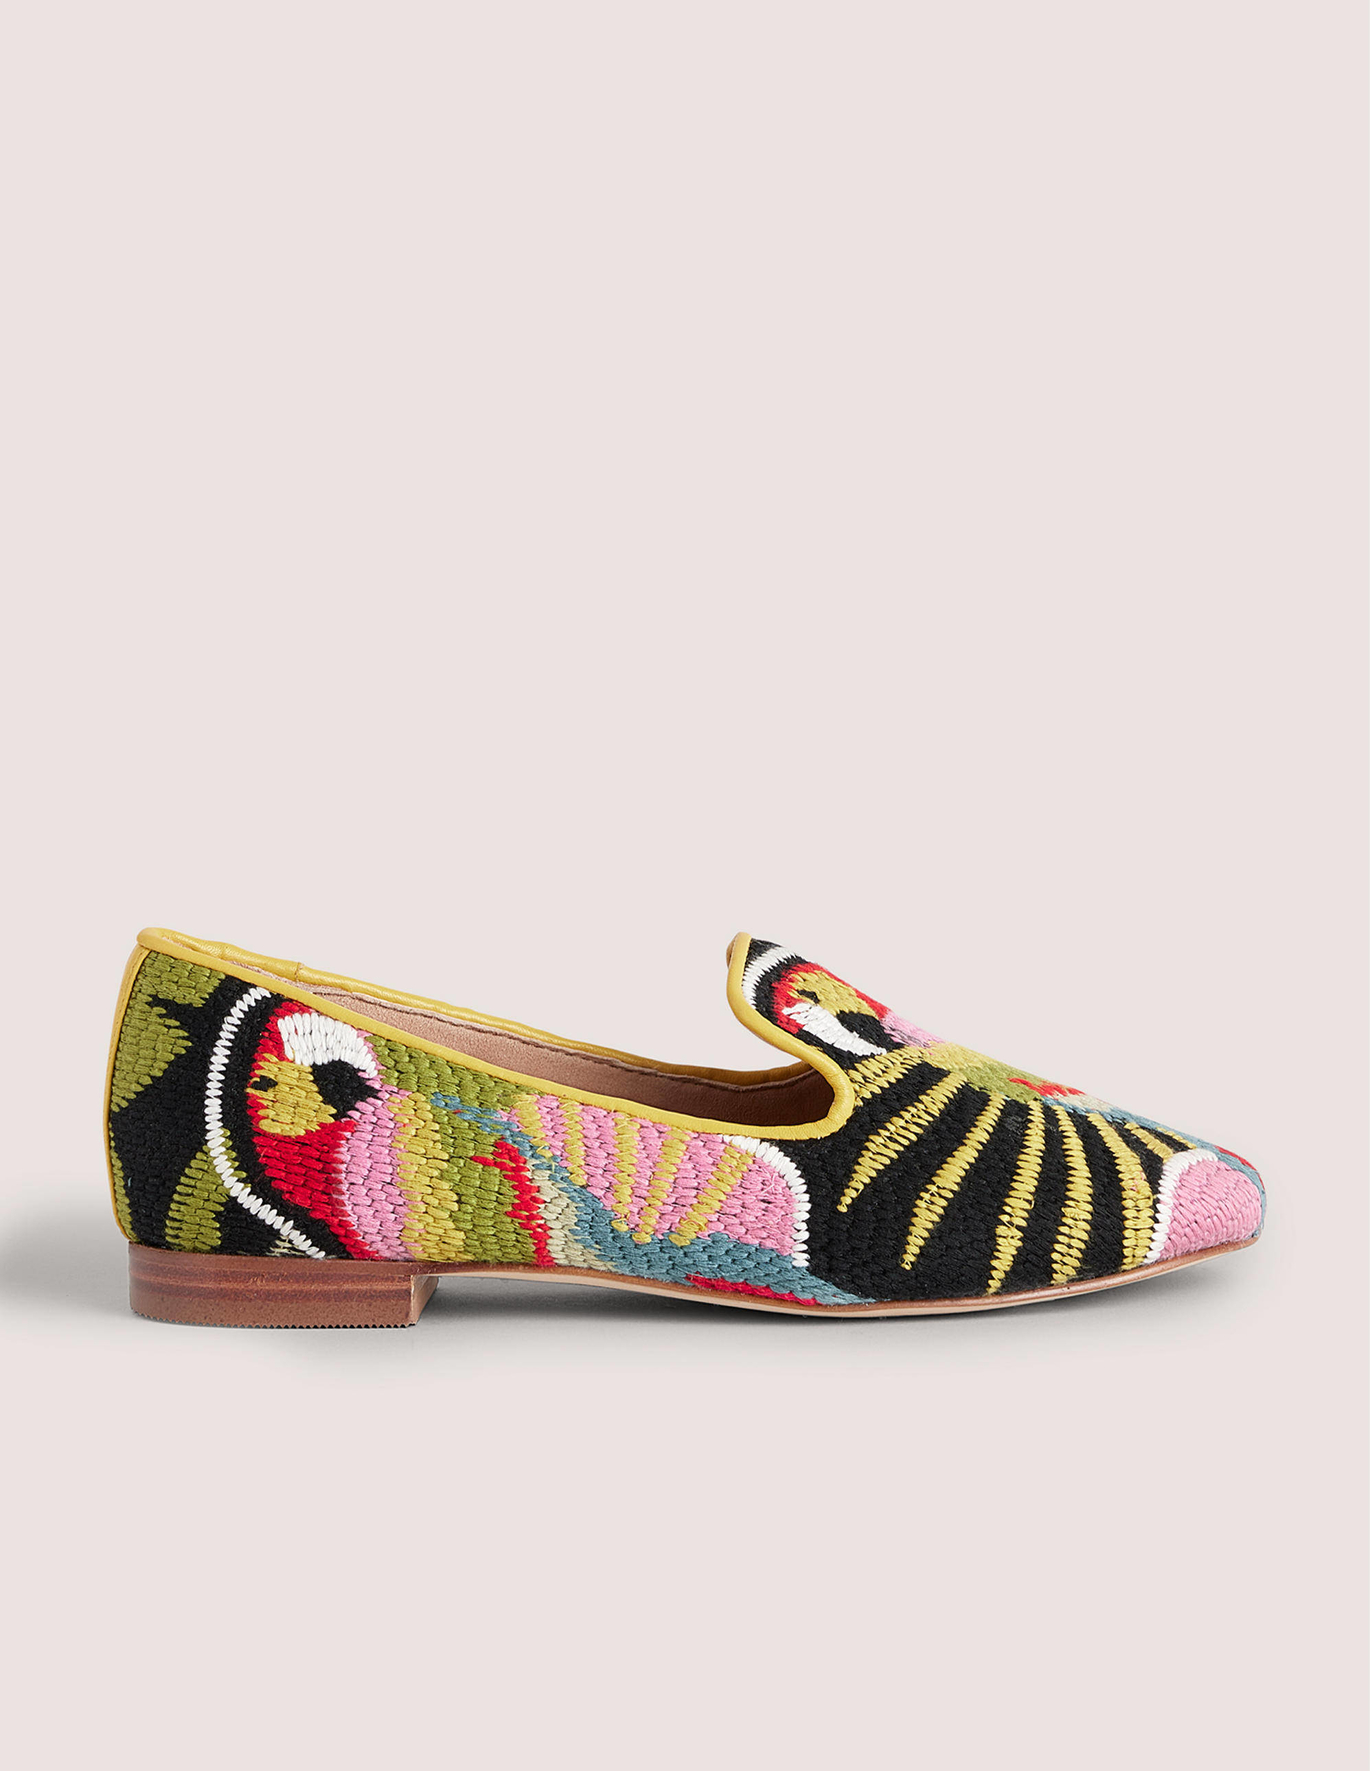 Boden Tapestry Embroidered Loafers - Parrot